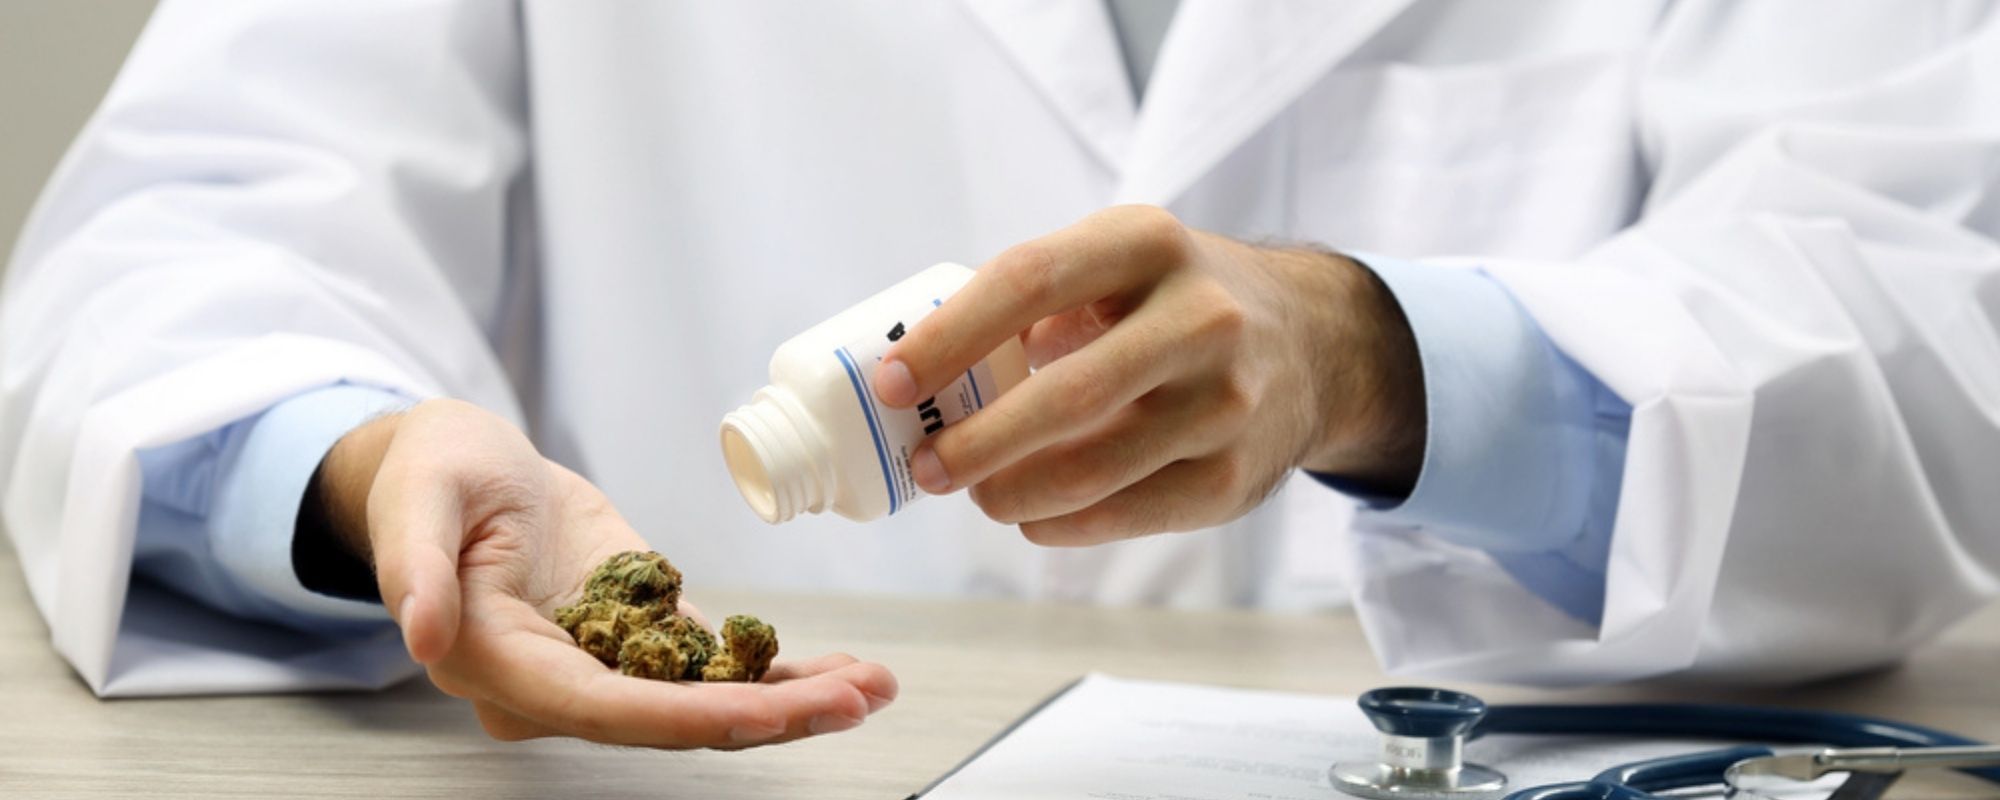 A Comprehensive Guide to Finding an MMJ Doctor Online